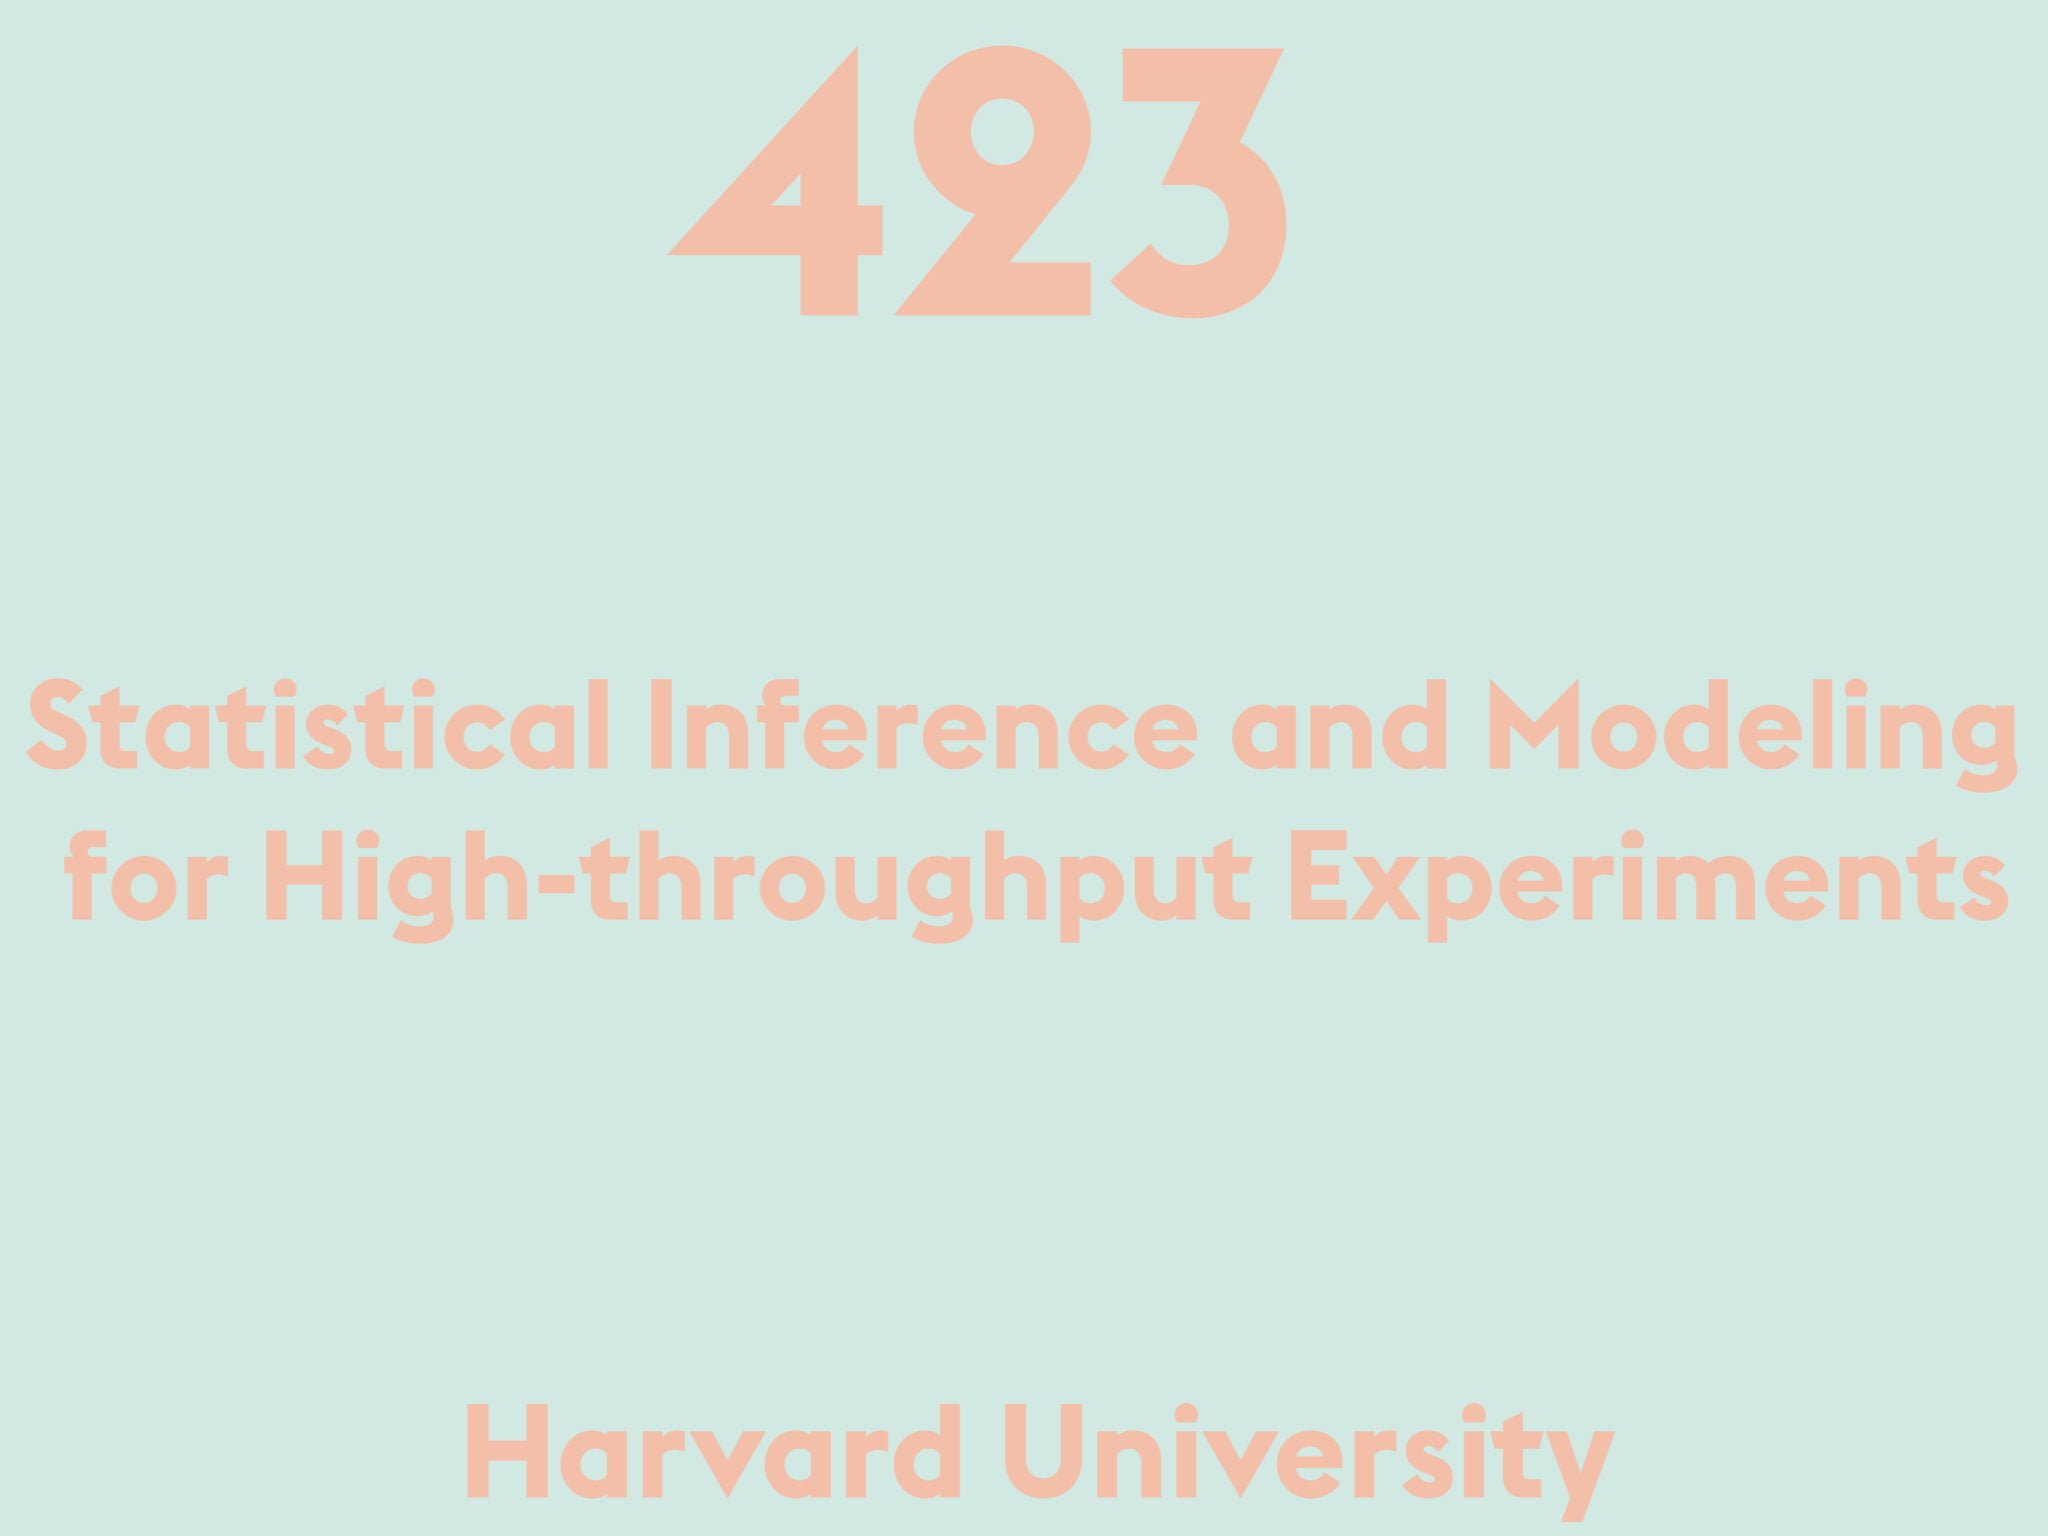 Statistical Inference and Modeling for High-throughput Experiments